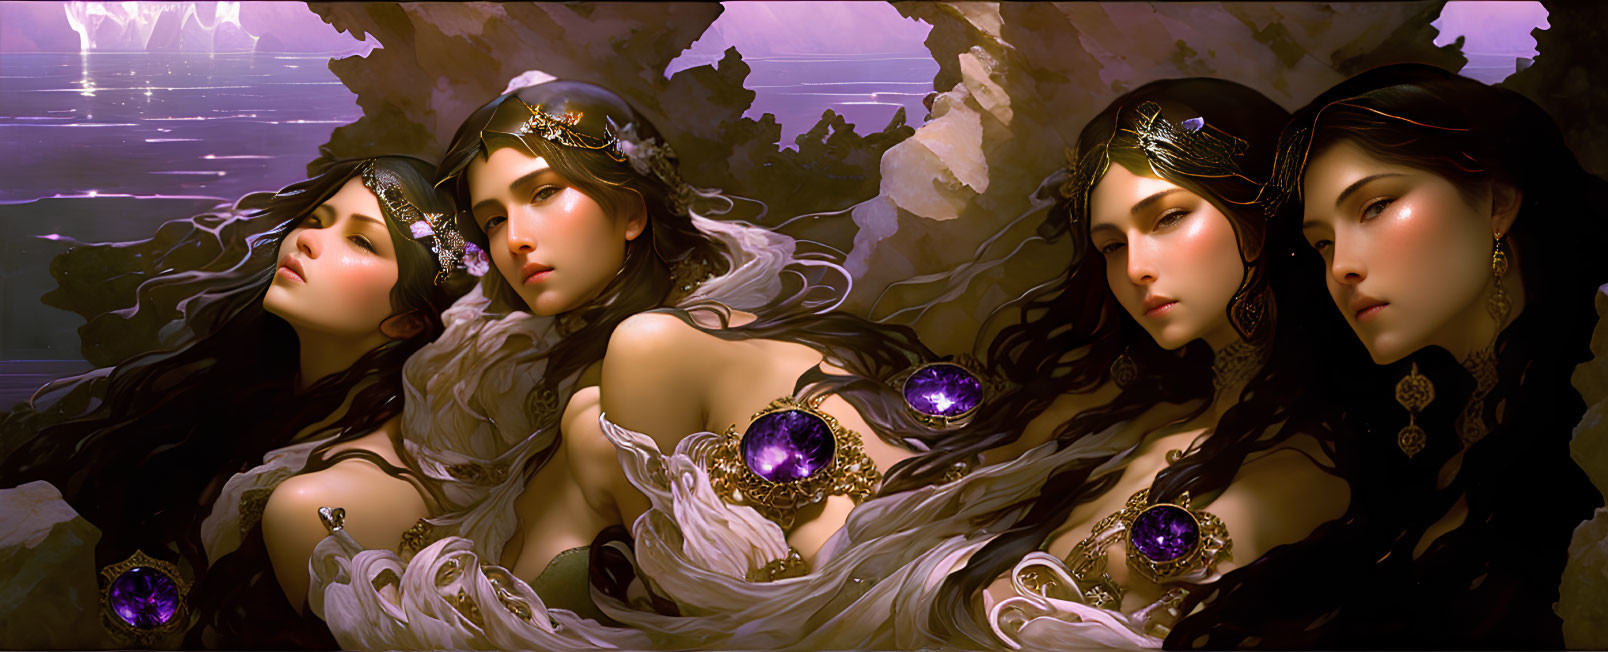 Ethereal women with dark hair and gemstone jewelry in twilight seascape